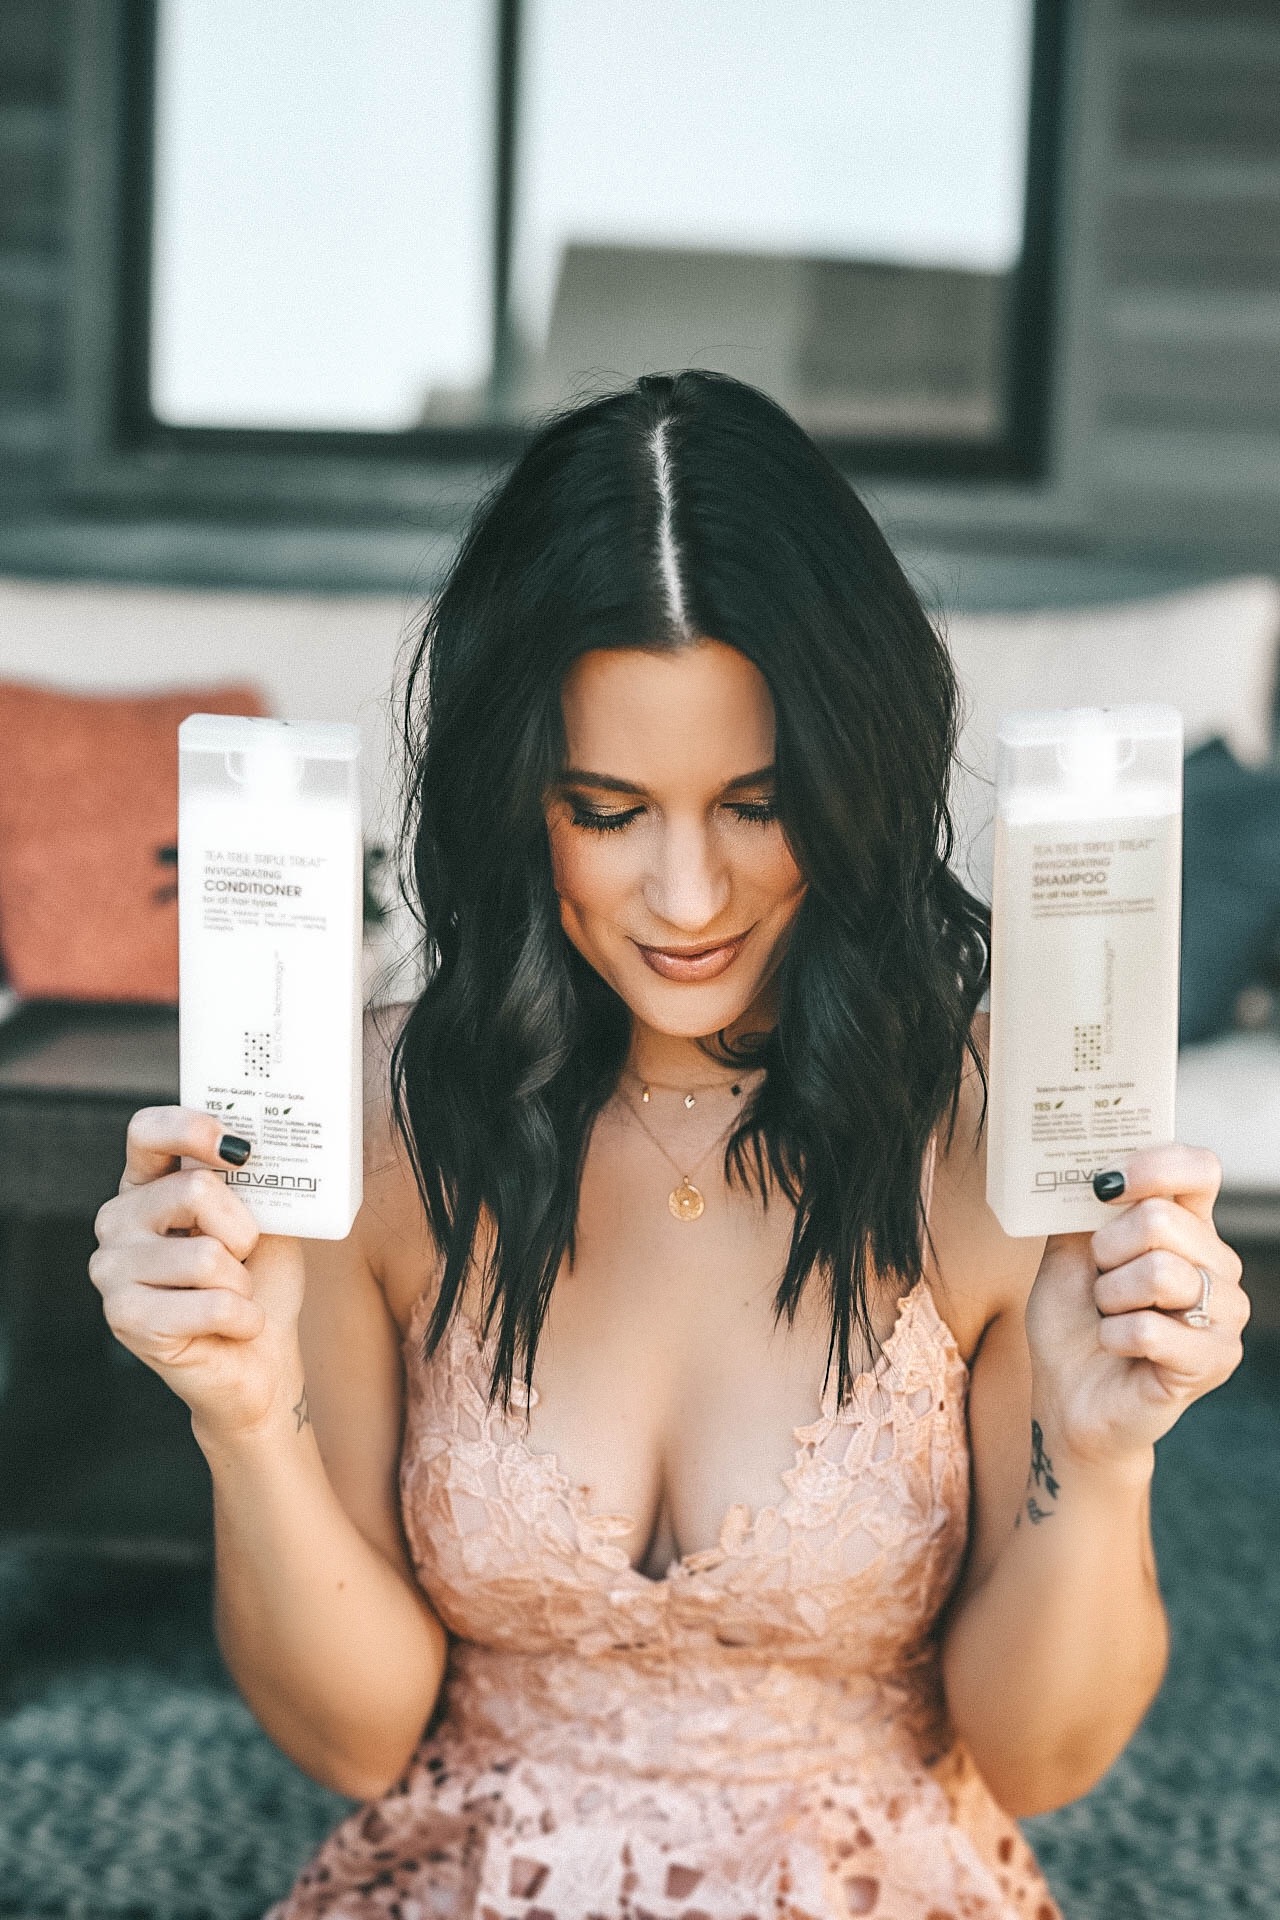 Get the Healthiest Hair of Your Life with Giovanni Cosmetics | hair care tips | beauty tips for women || Dressed to Kill #ad #healthyhair #beautytips #GiovanniCosmetics #GiovanniHairCare #EcoChic #dtkaustin